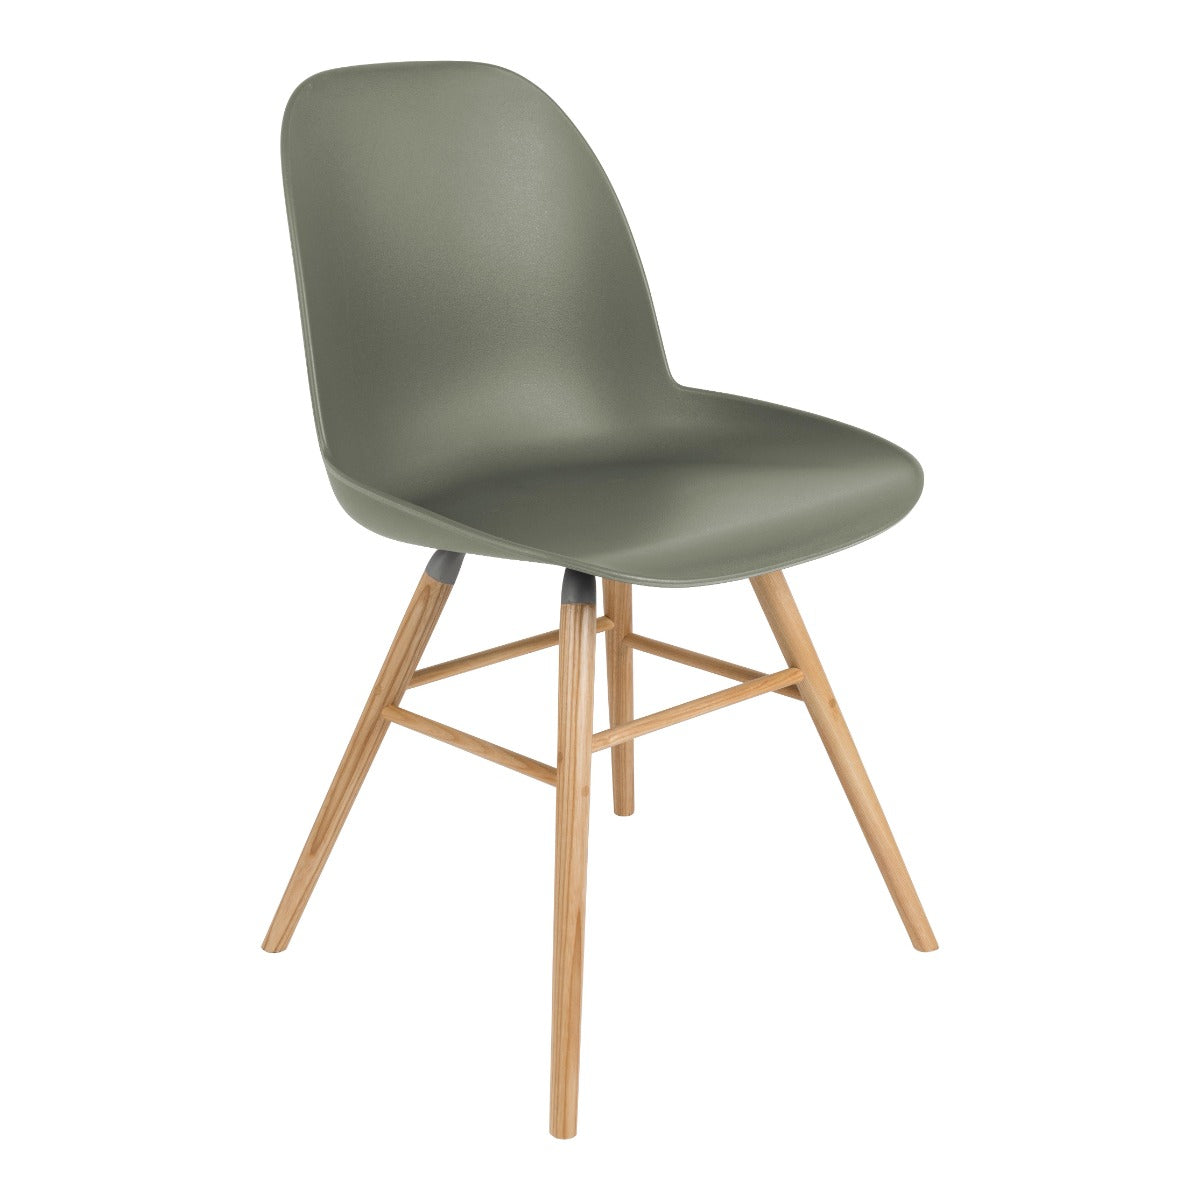 The Albert Kuip chair, designed by the Amsterdam Studio APE, is an amazing combination of modern and retro style. The streamlined seat is supported by wooden, minimalist ash wood legs. The whole project has an extremely universal character, which gives numerous arrangement possibilities, especially in the case of Scandinavian interiors, vintage or modern. It works perfectly as a dining room or office chair.